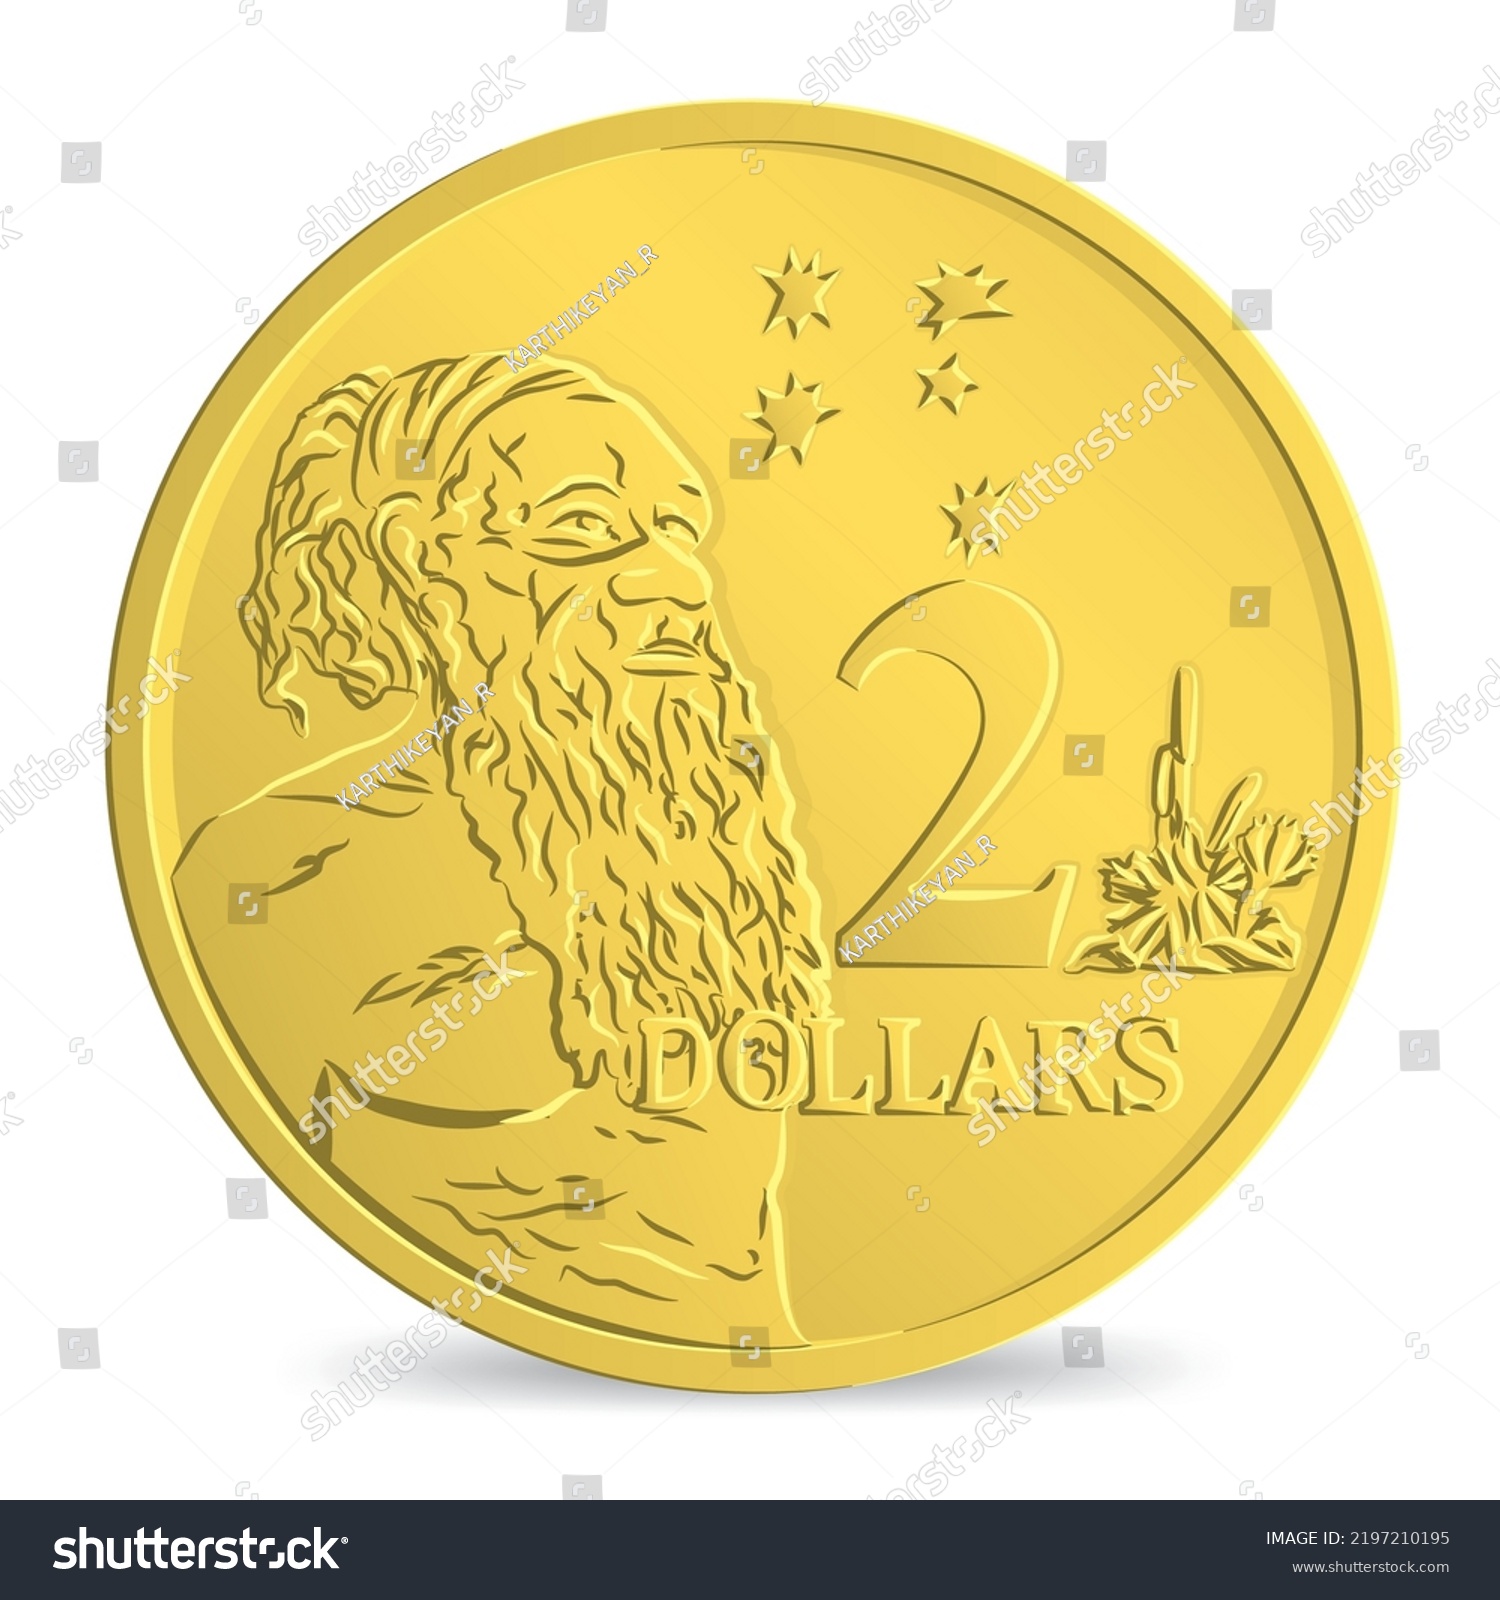 SVG of Reverse of Australian Two dollar coin isolated on white background in vector illustration svg